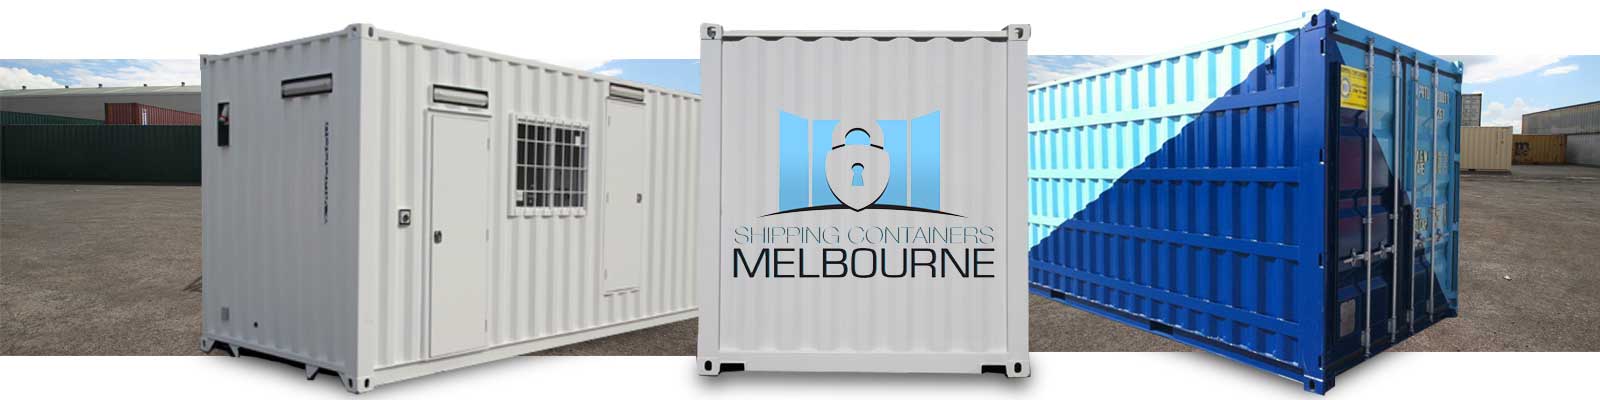 Shipping Containers Melbourne